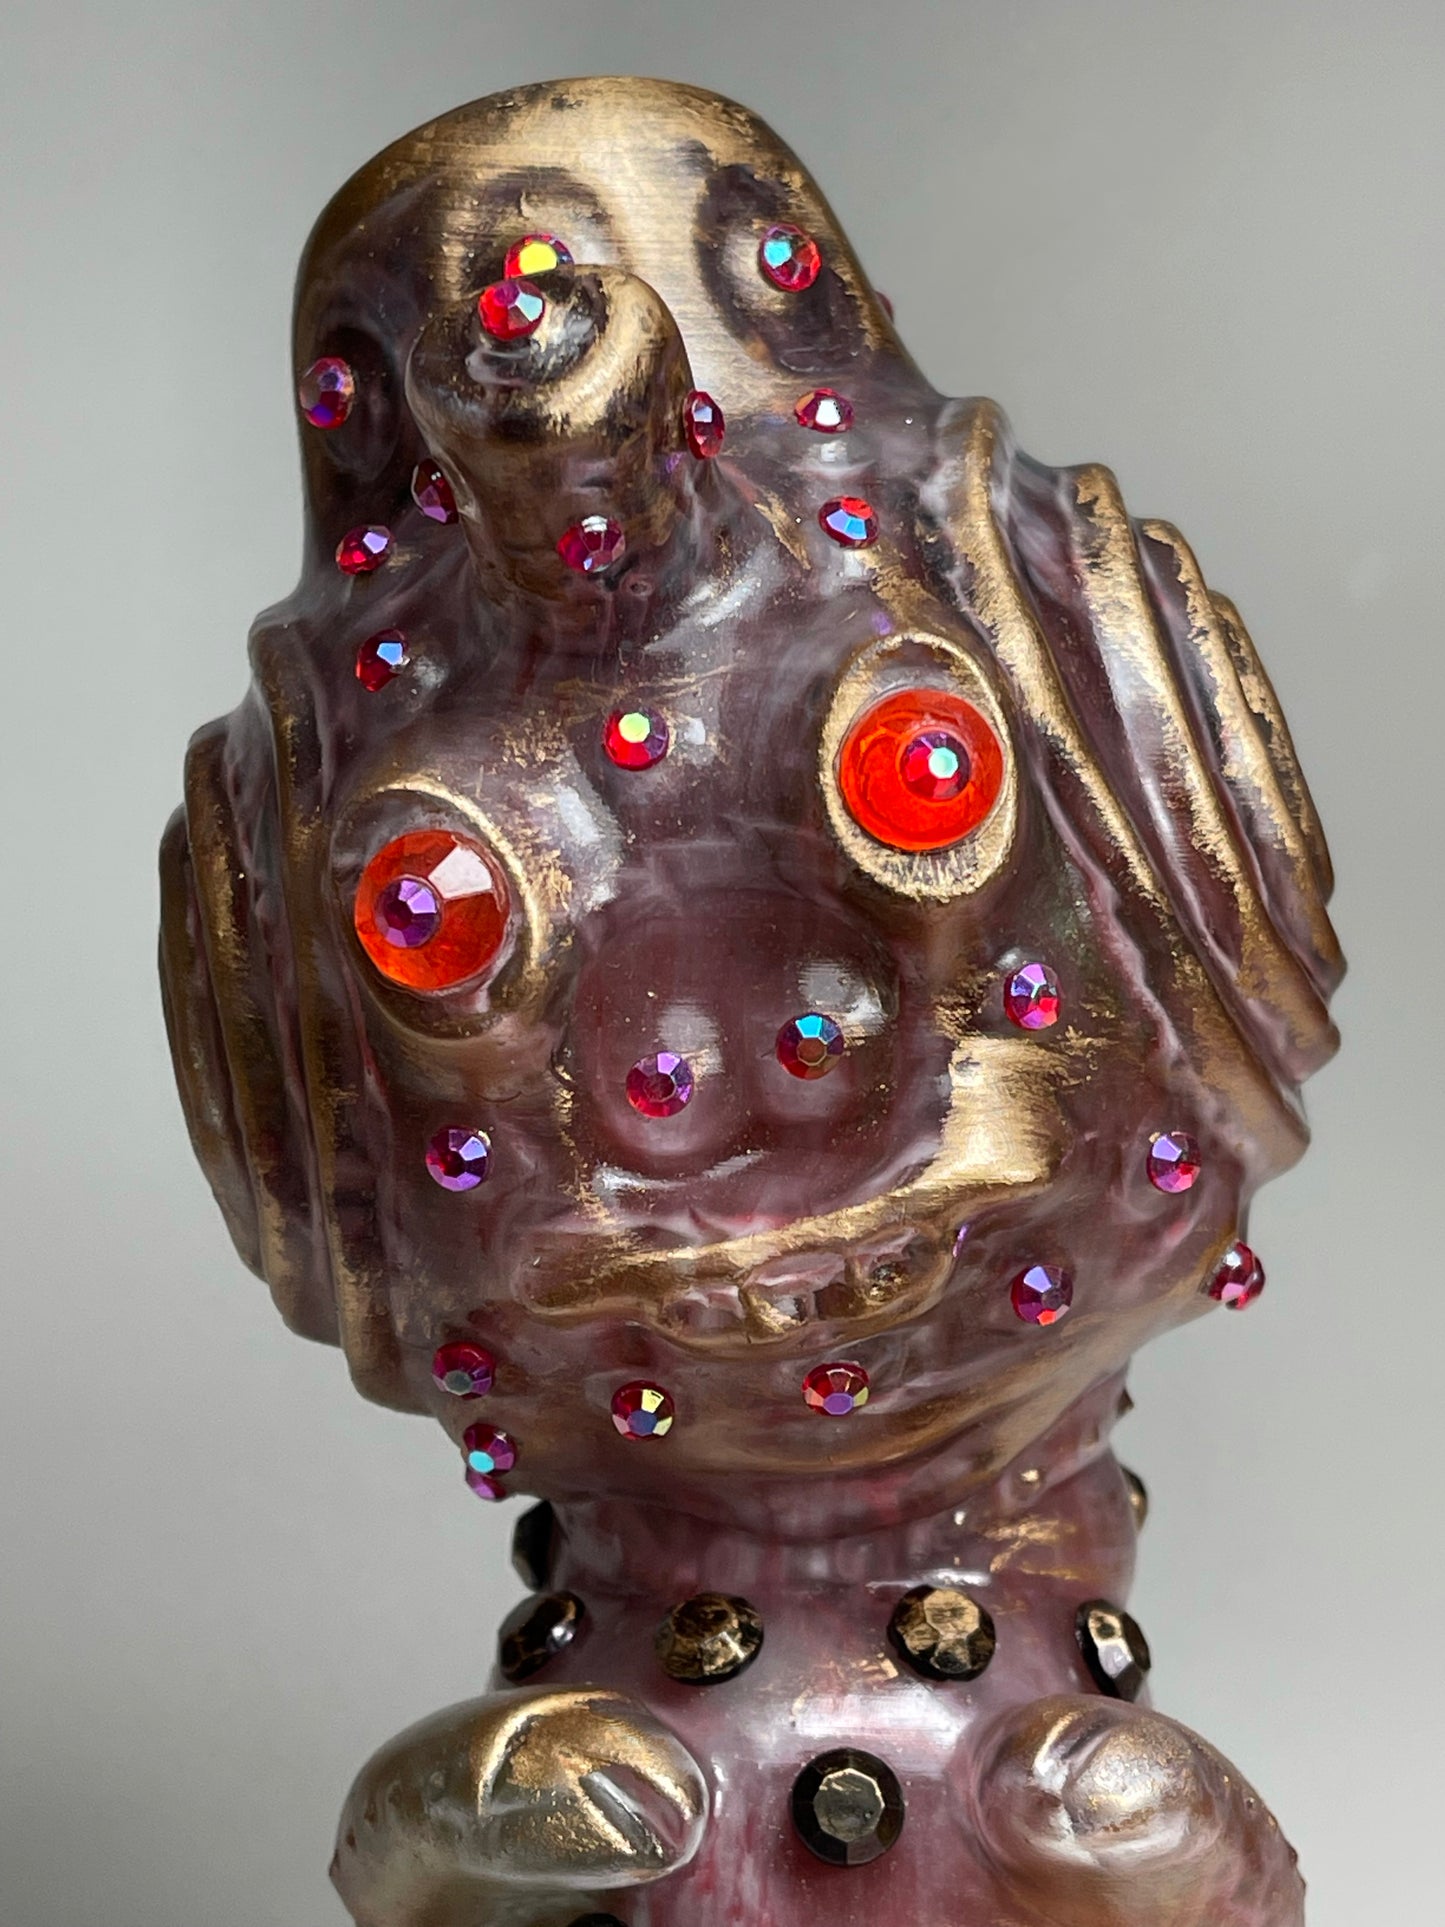 Robot Pig: Visit to the Planet of Parasitic Rhinestones